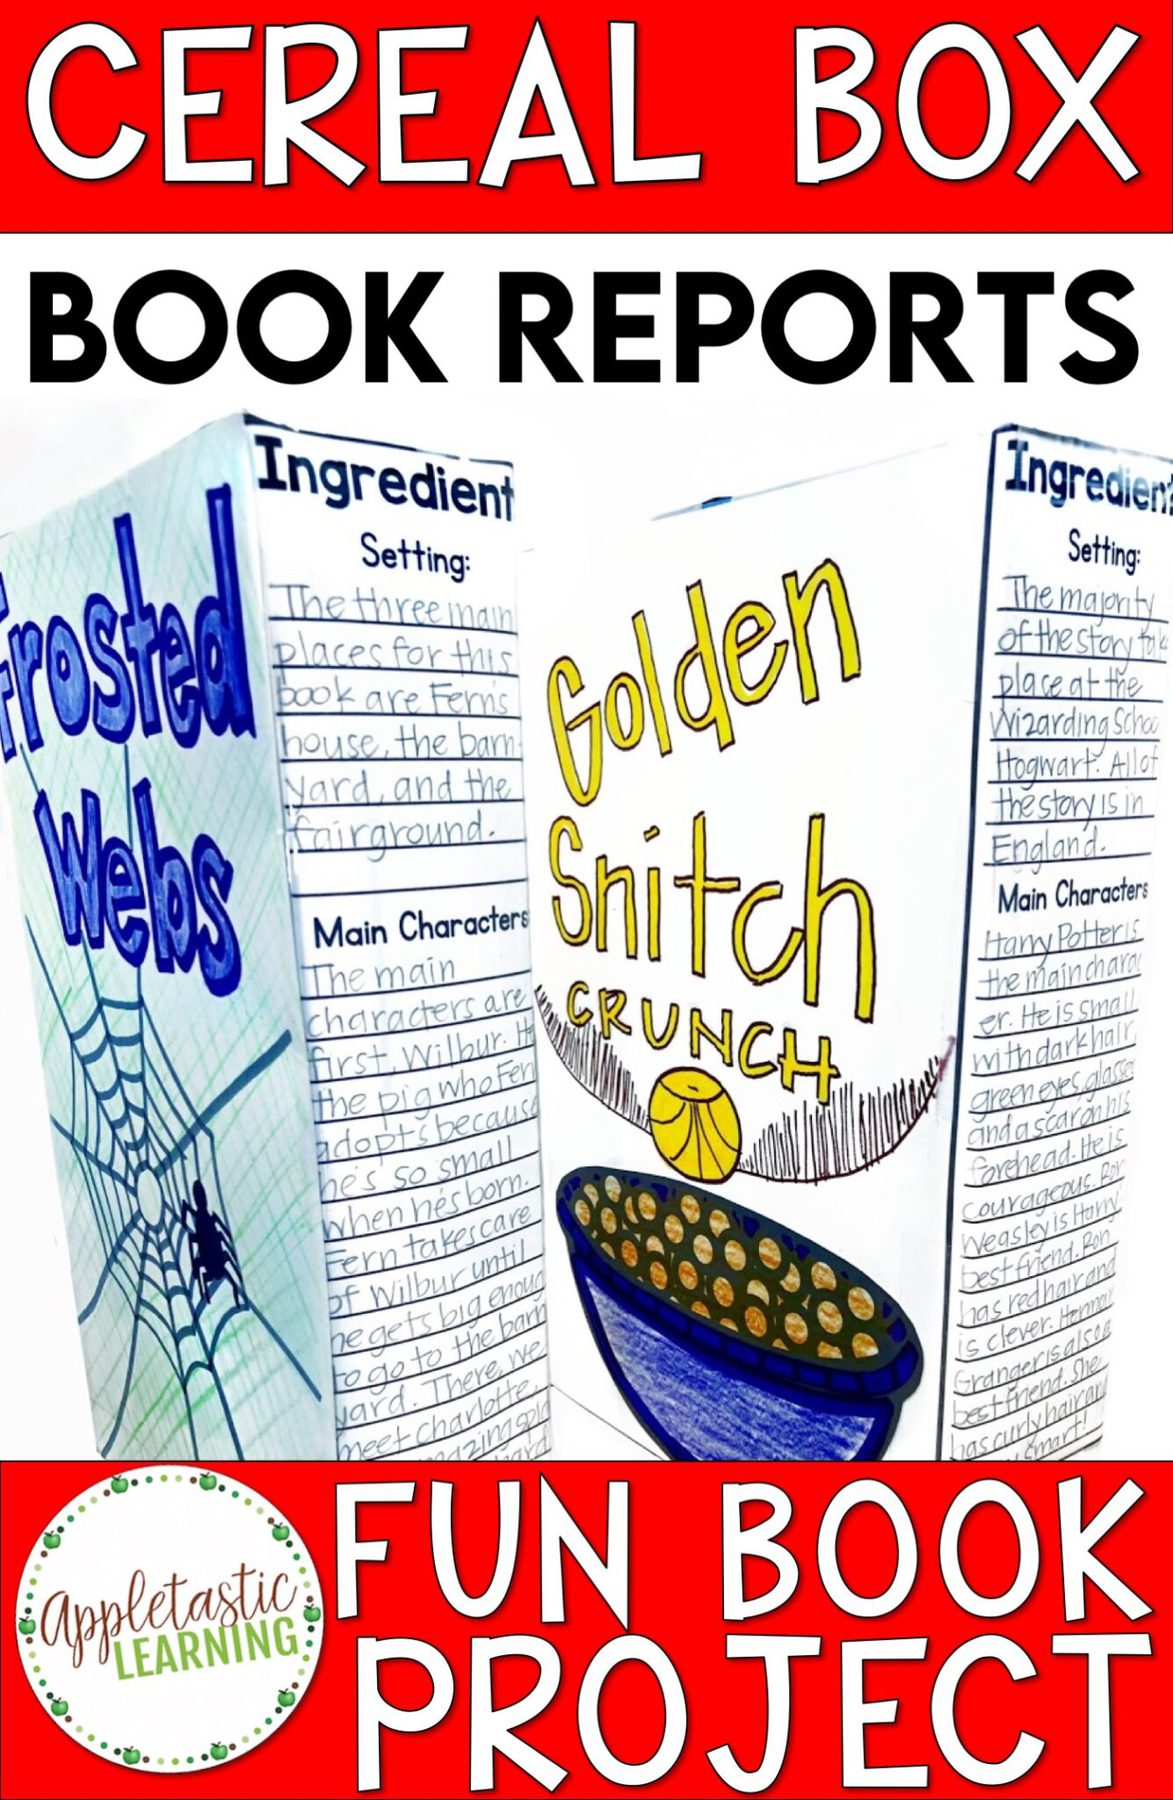 cereal-box-book-reports-a-fun-alternative-appletastic-learning